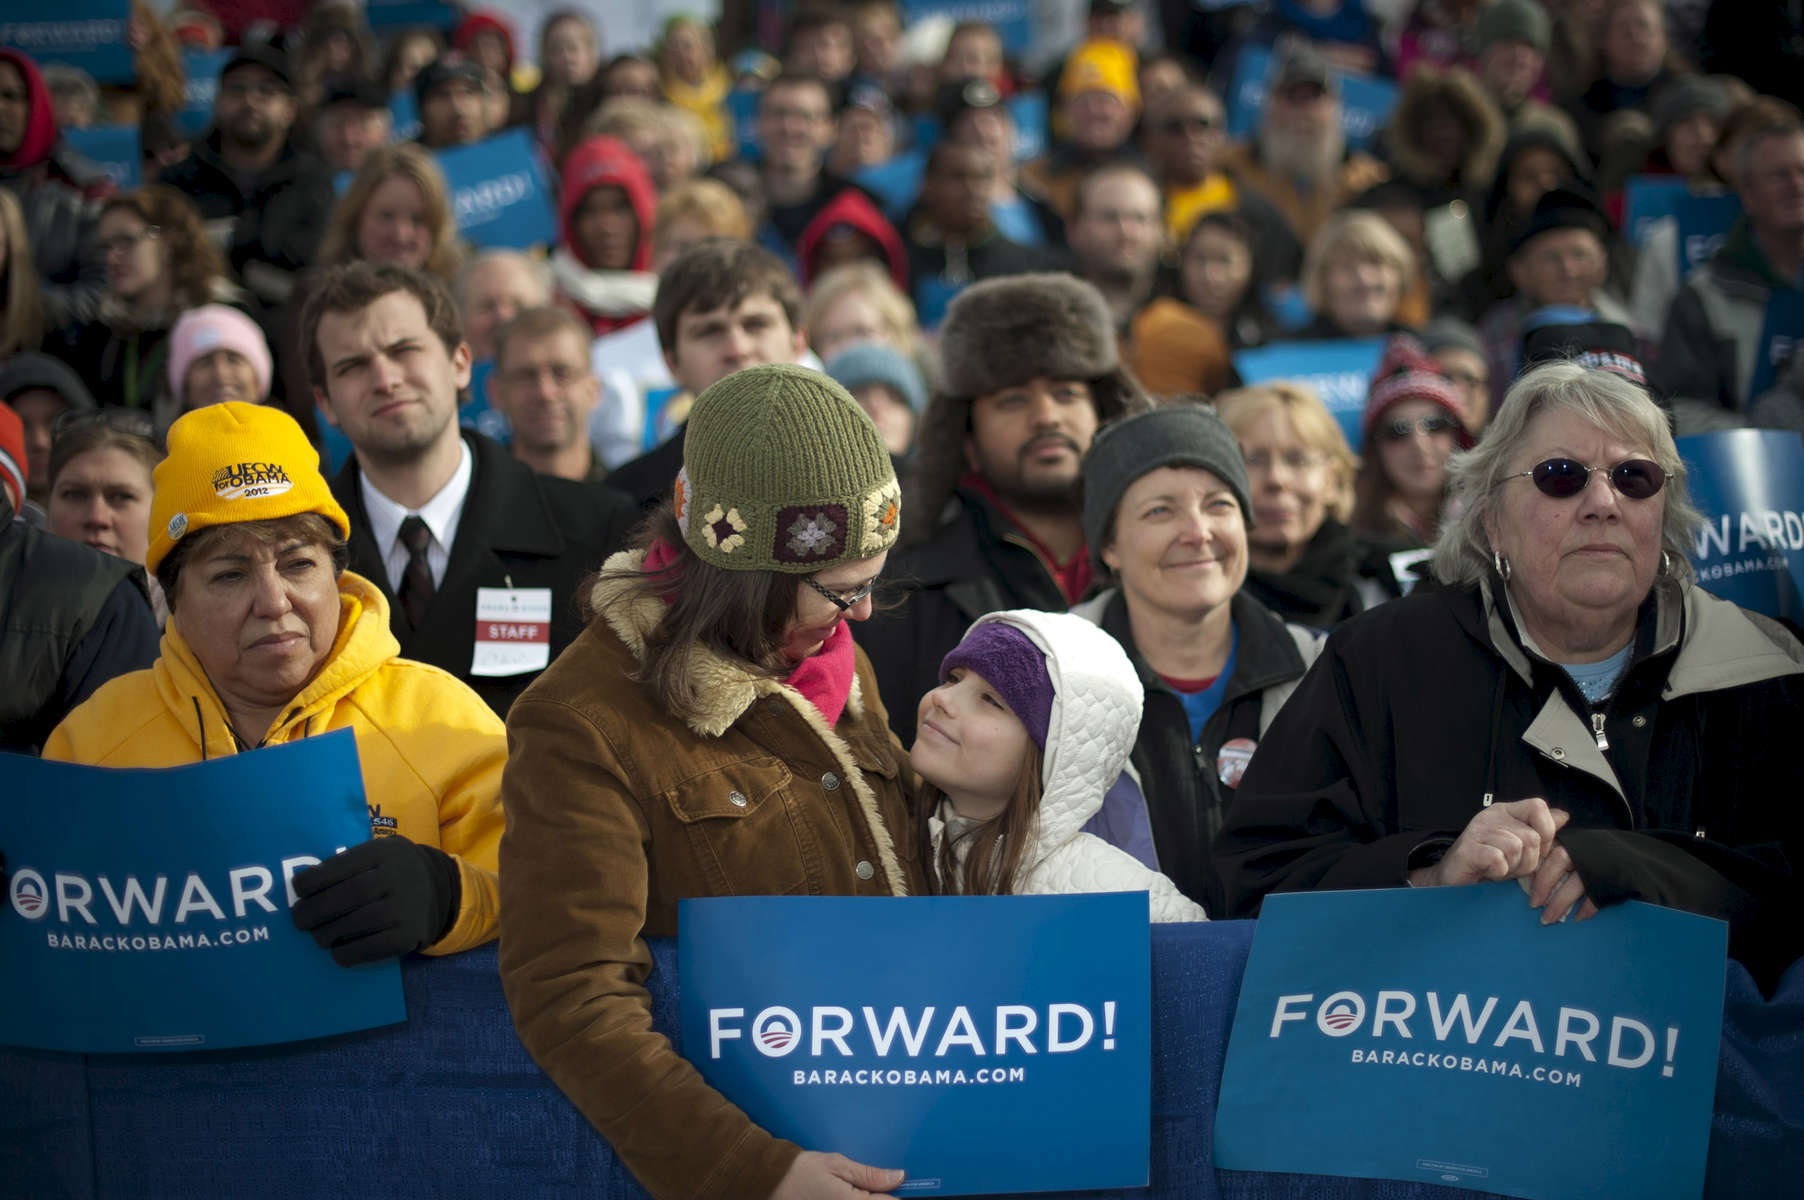 November 1, 2012 - Green Bay, WI: A mother and daughter beam at each other at a tarmac rally for President Barack Obama a few days before the 2012 election.  (Scout Tufankjian for Obama for America/Polaris)